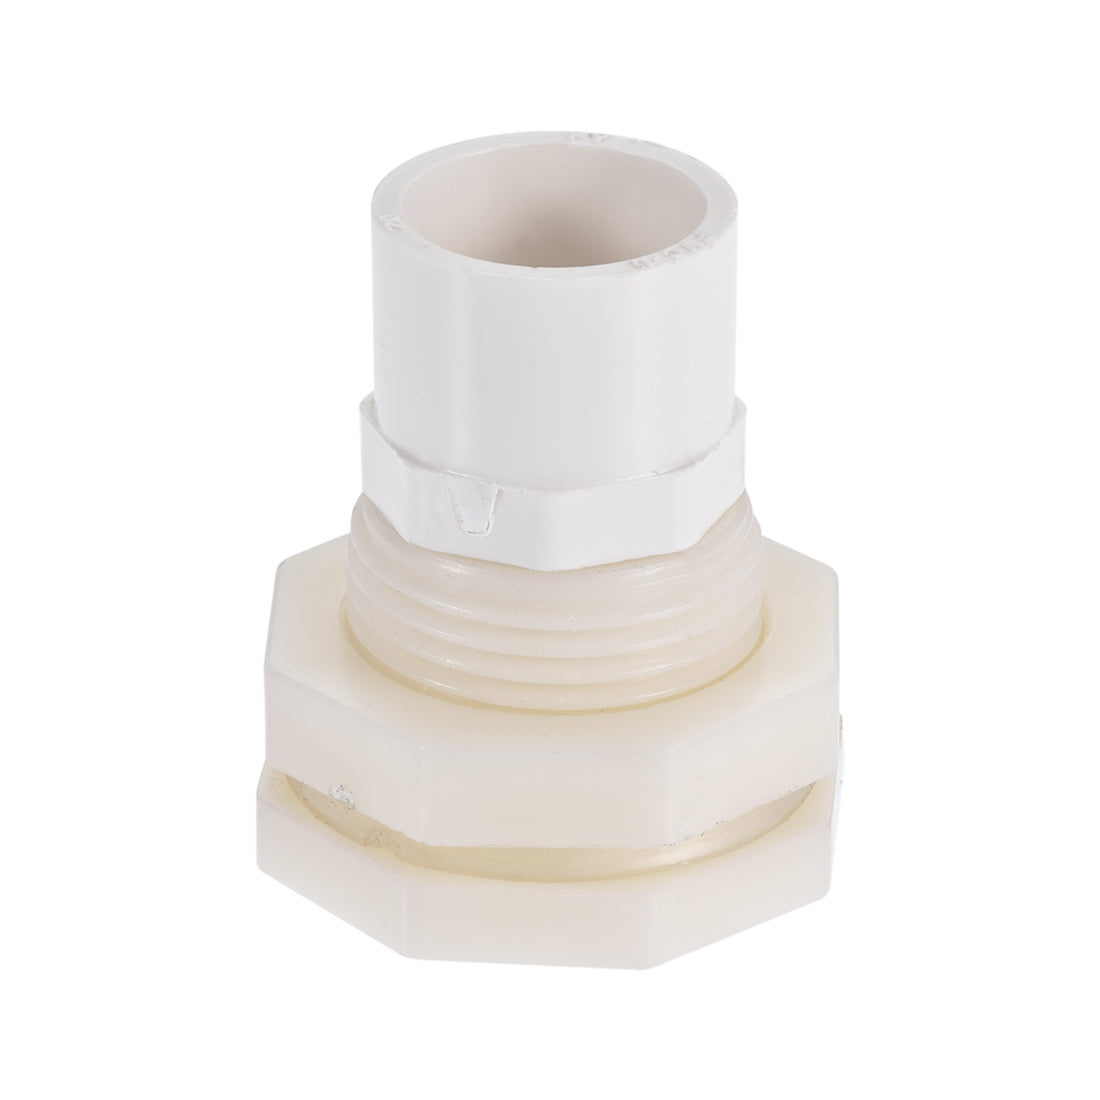 Uxcell Uxcell Bulkhead Fitting, G1 Female 1.73" Male, Tube Adaptor Fitting, with Silicone Gasket and Pipe Connector, for Water Tanks, PVC, White